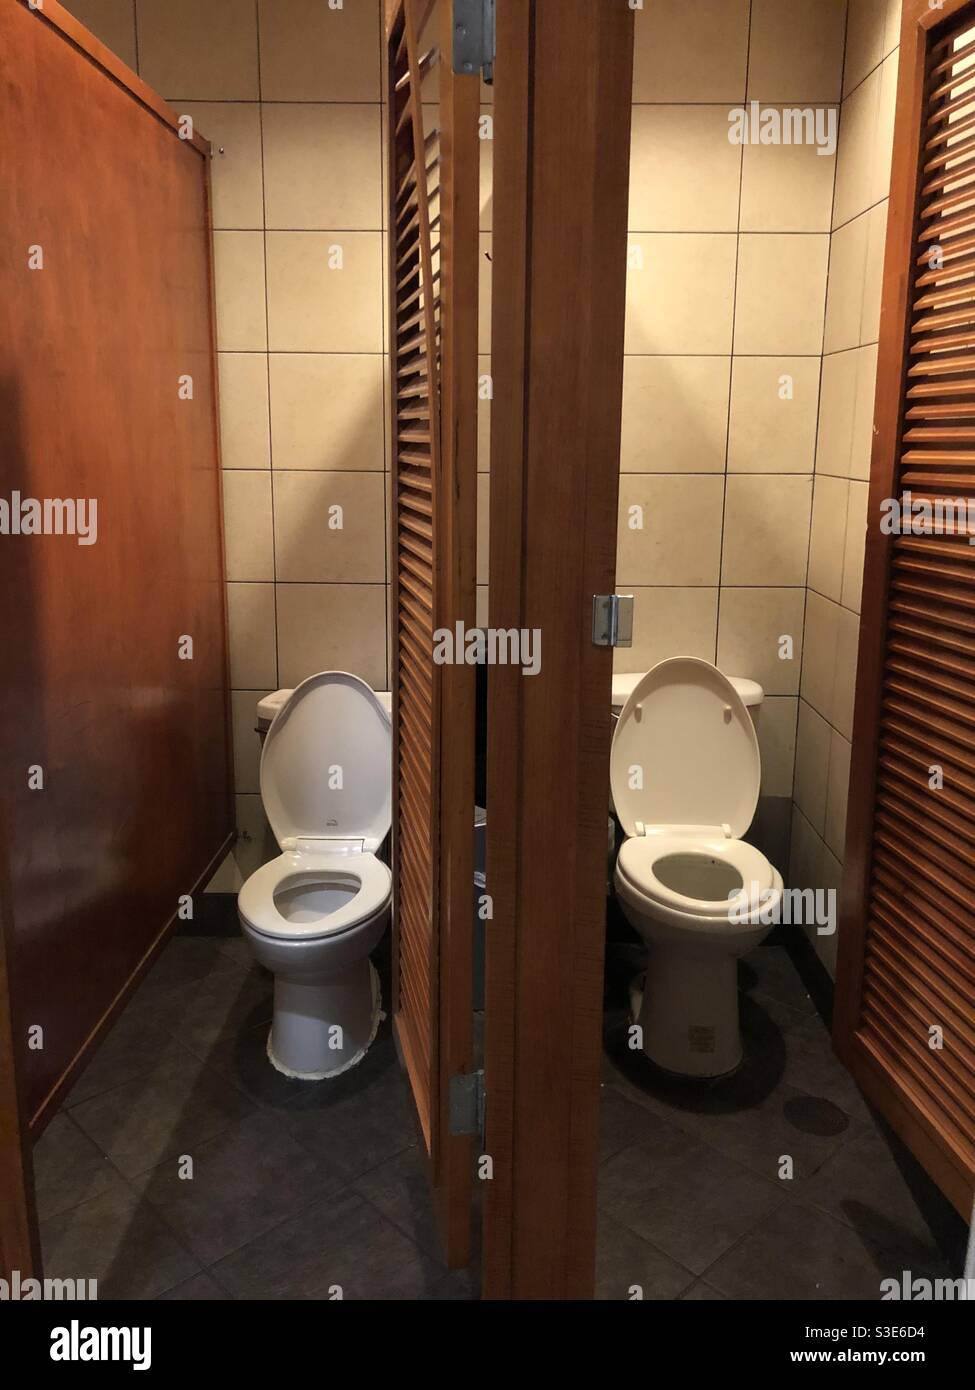 Two toilets in toilet stalls with open doors at a restaurant Stock Photo